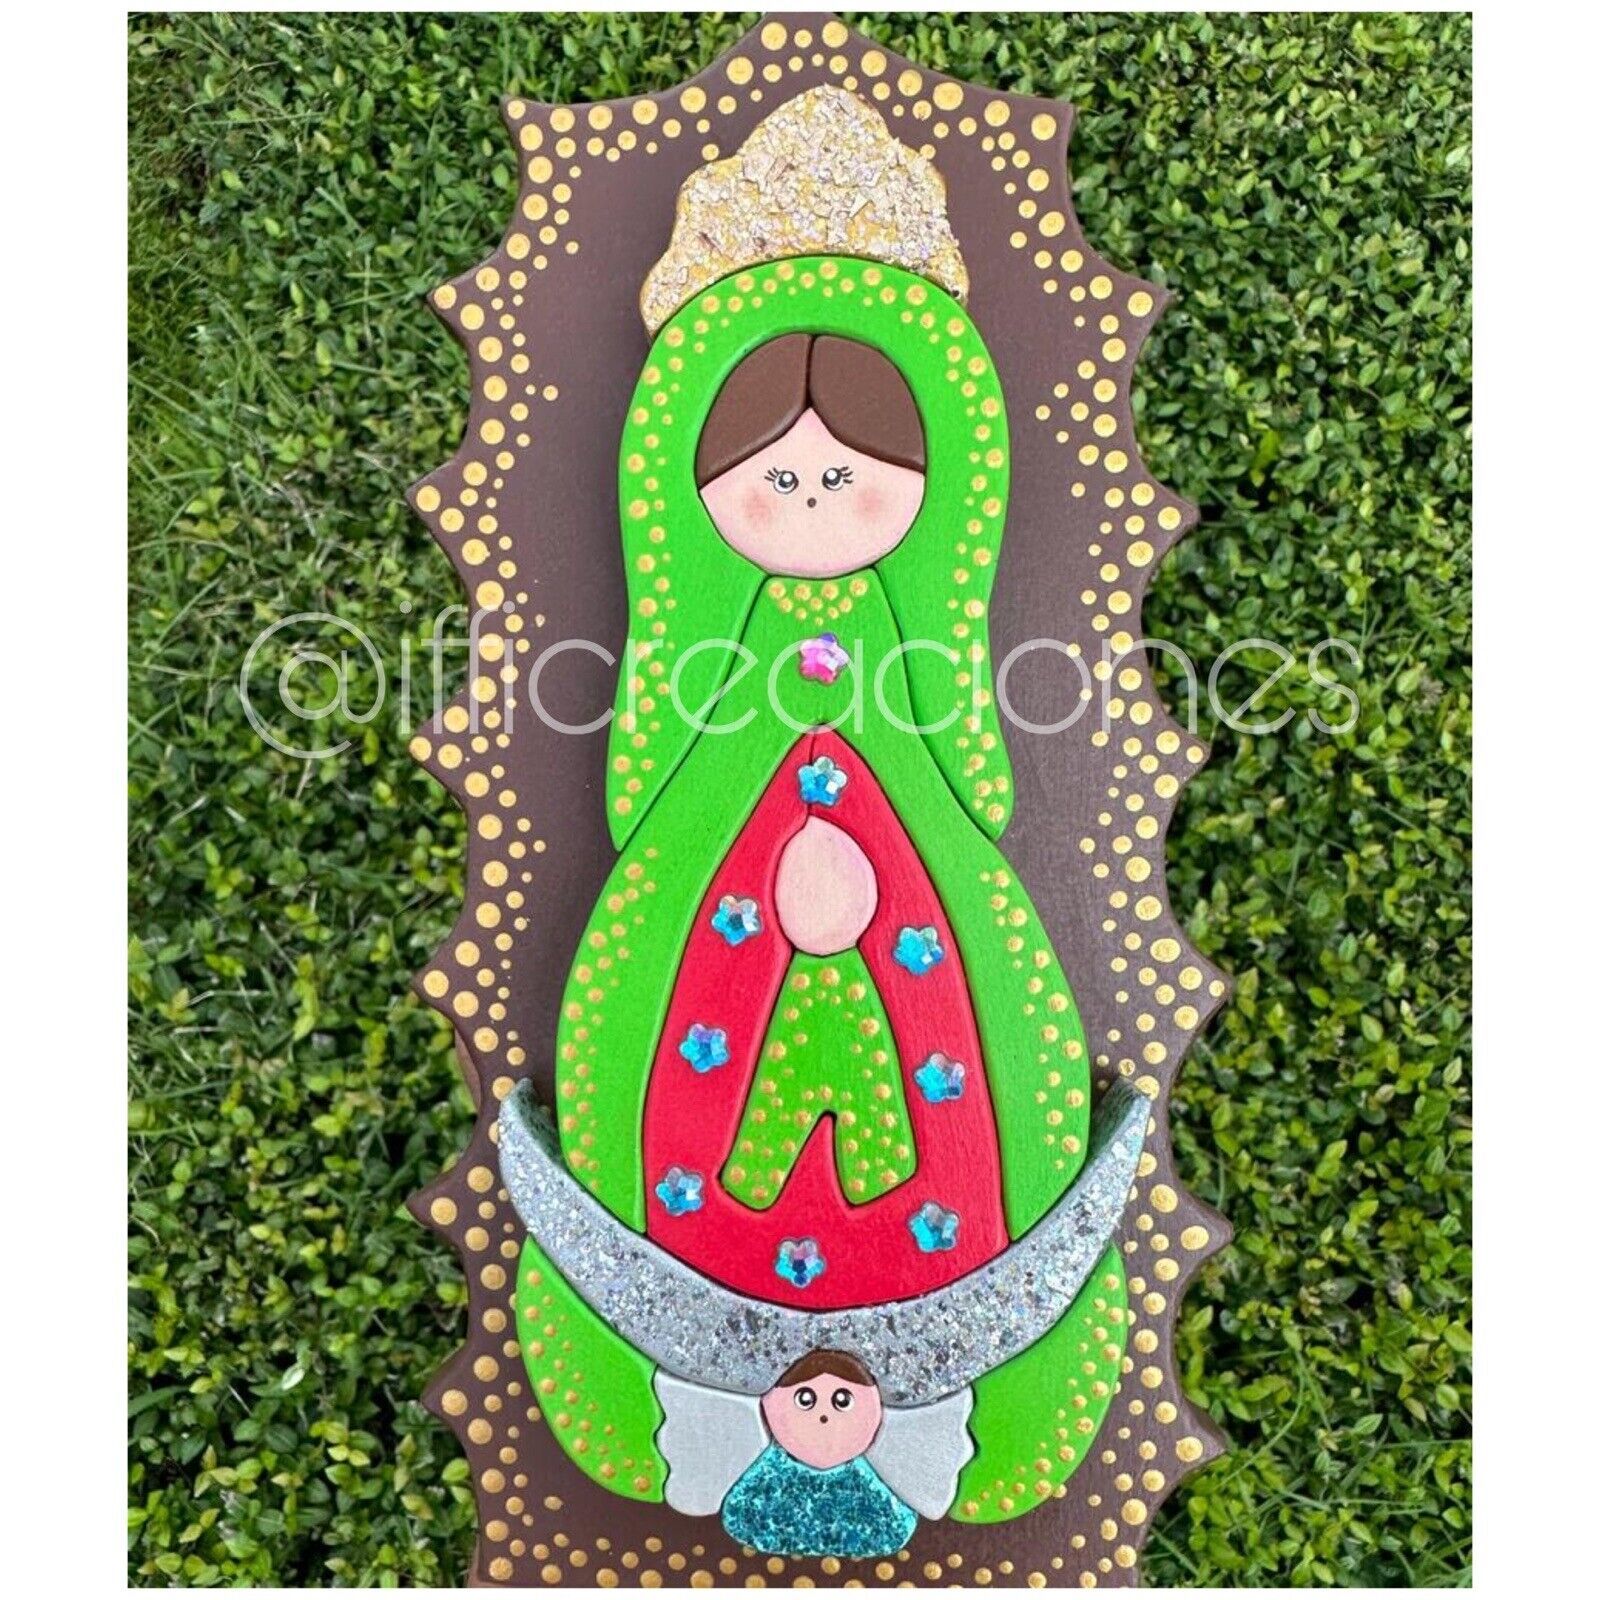 Virgen de Guadalupe hecha y pintada a mano/virgin crafted & painted by handmade